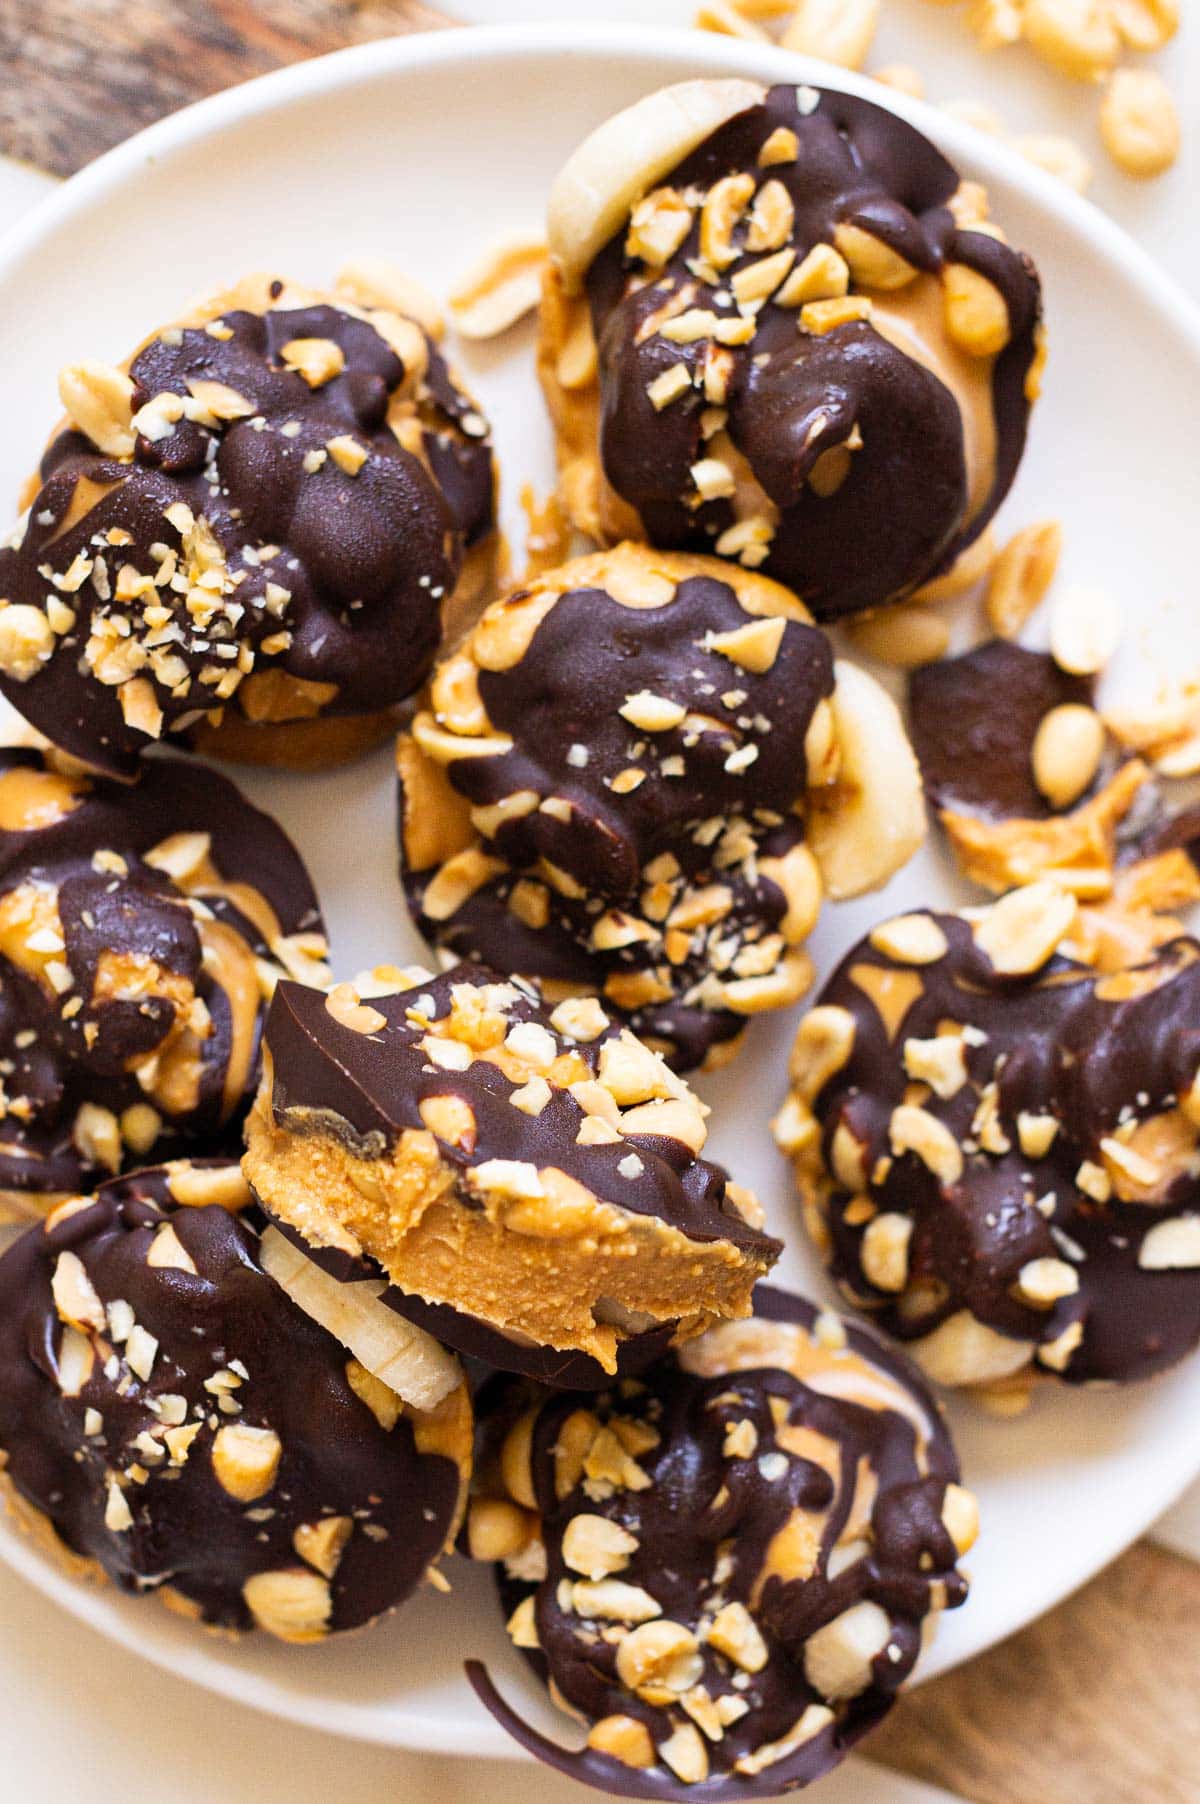 Frozen banana Snickers bites served on a platter.